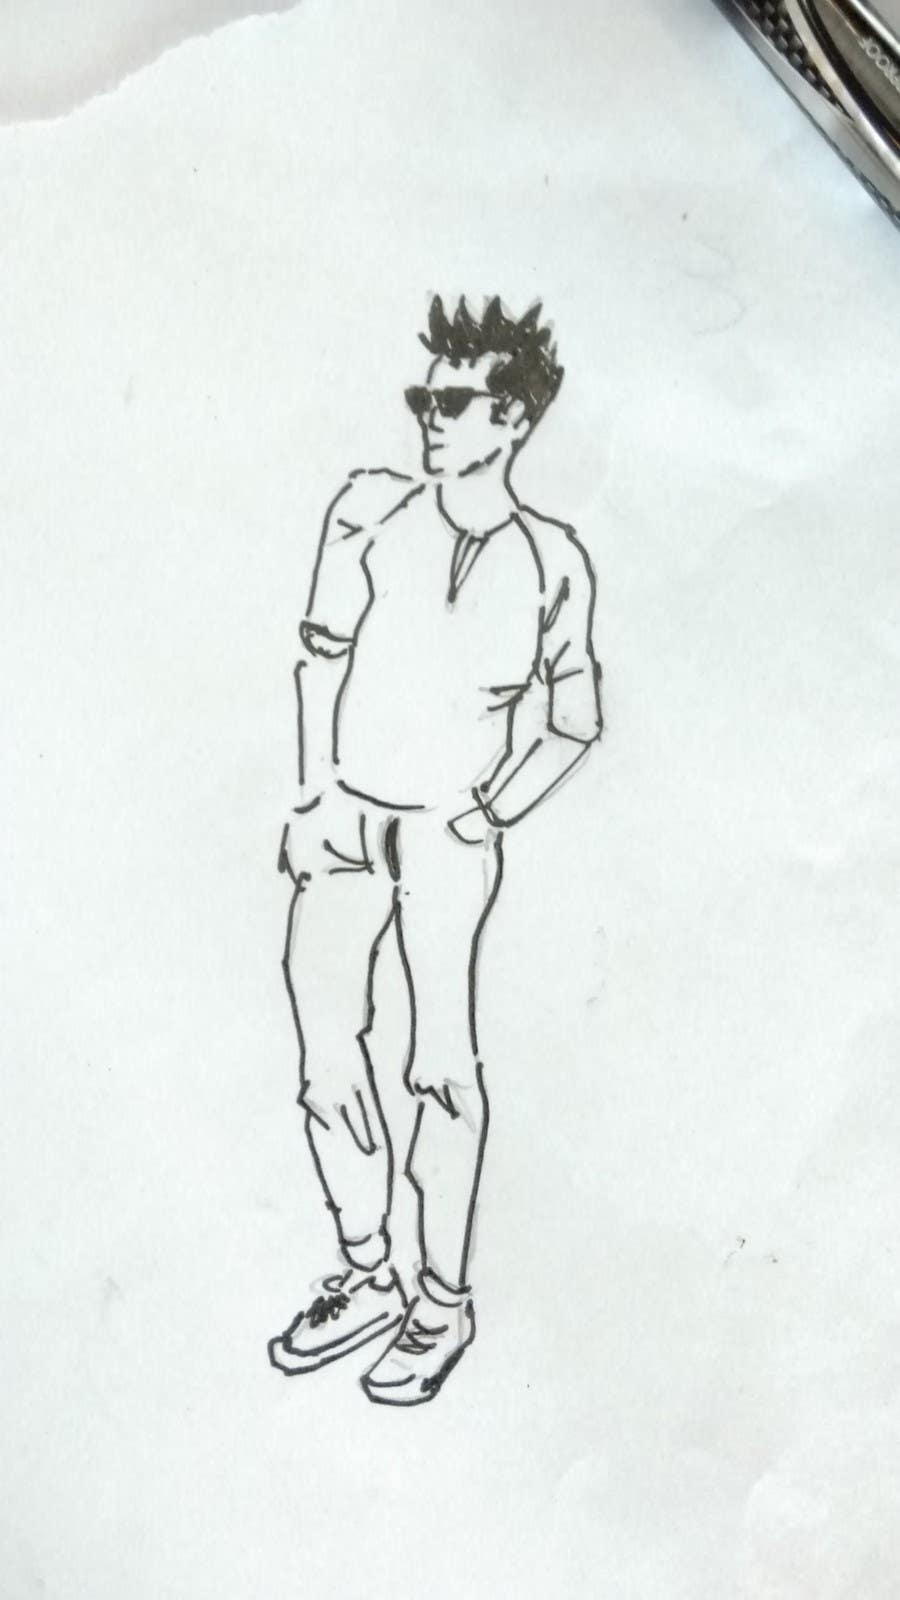 Konkurrenceindlæg #2 for                                                 need a sketch of a cool guy, dressed casual
                                            